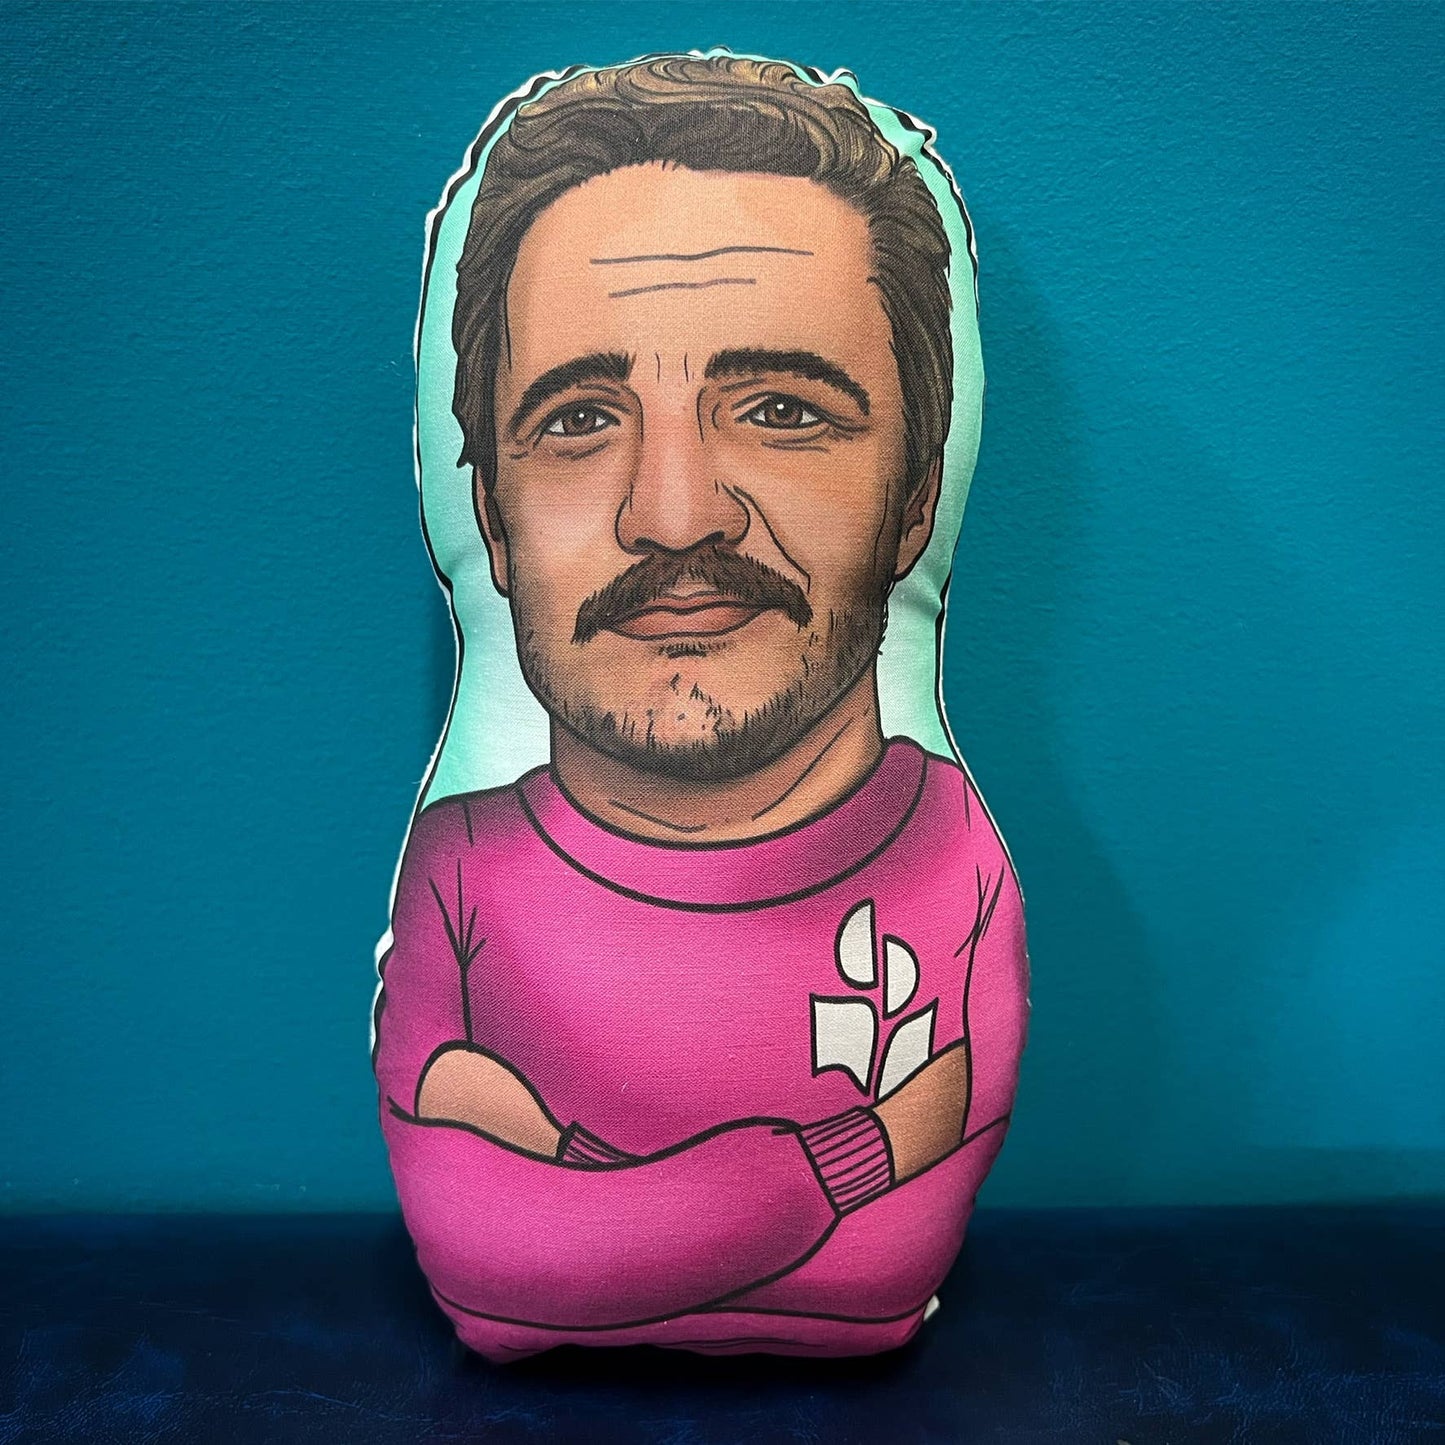 Daddy Pedro Pascal Inspired Plush Doll